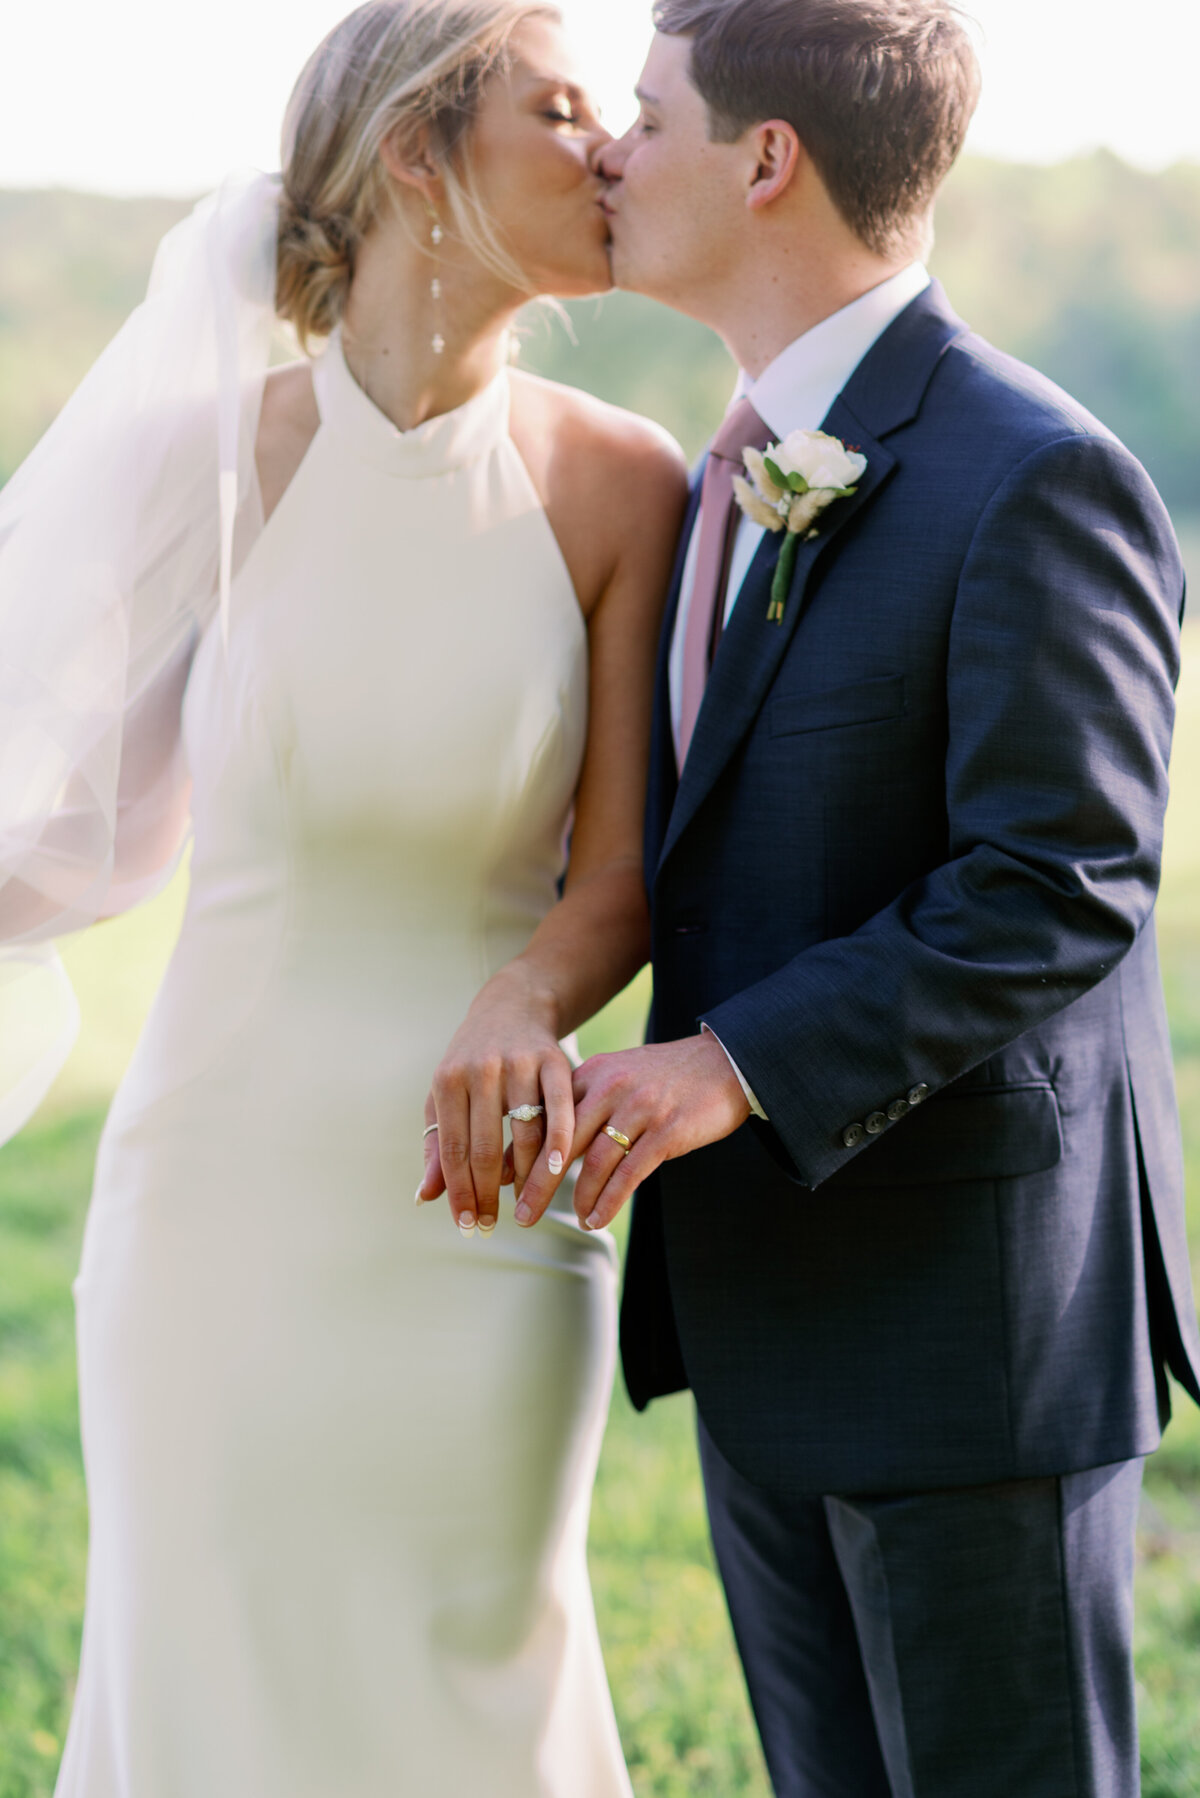 Best wedding photographers in Greenville SC Kayla Nelson PHotography capture wedding at Tin Roof Farms